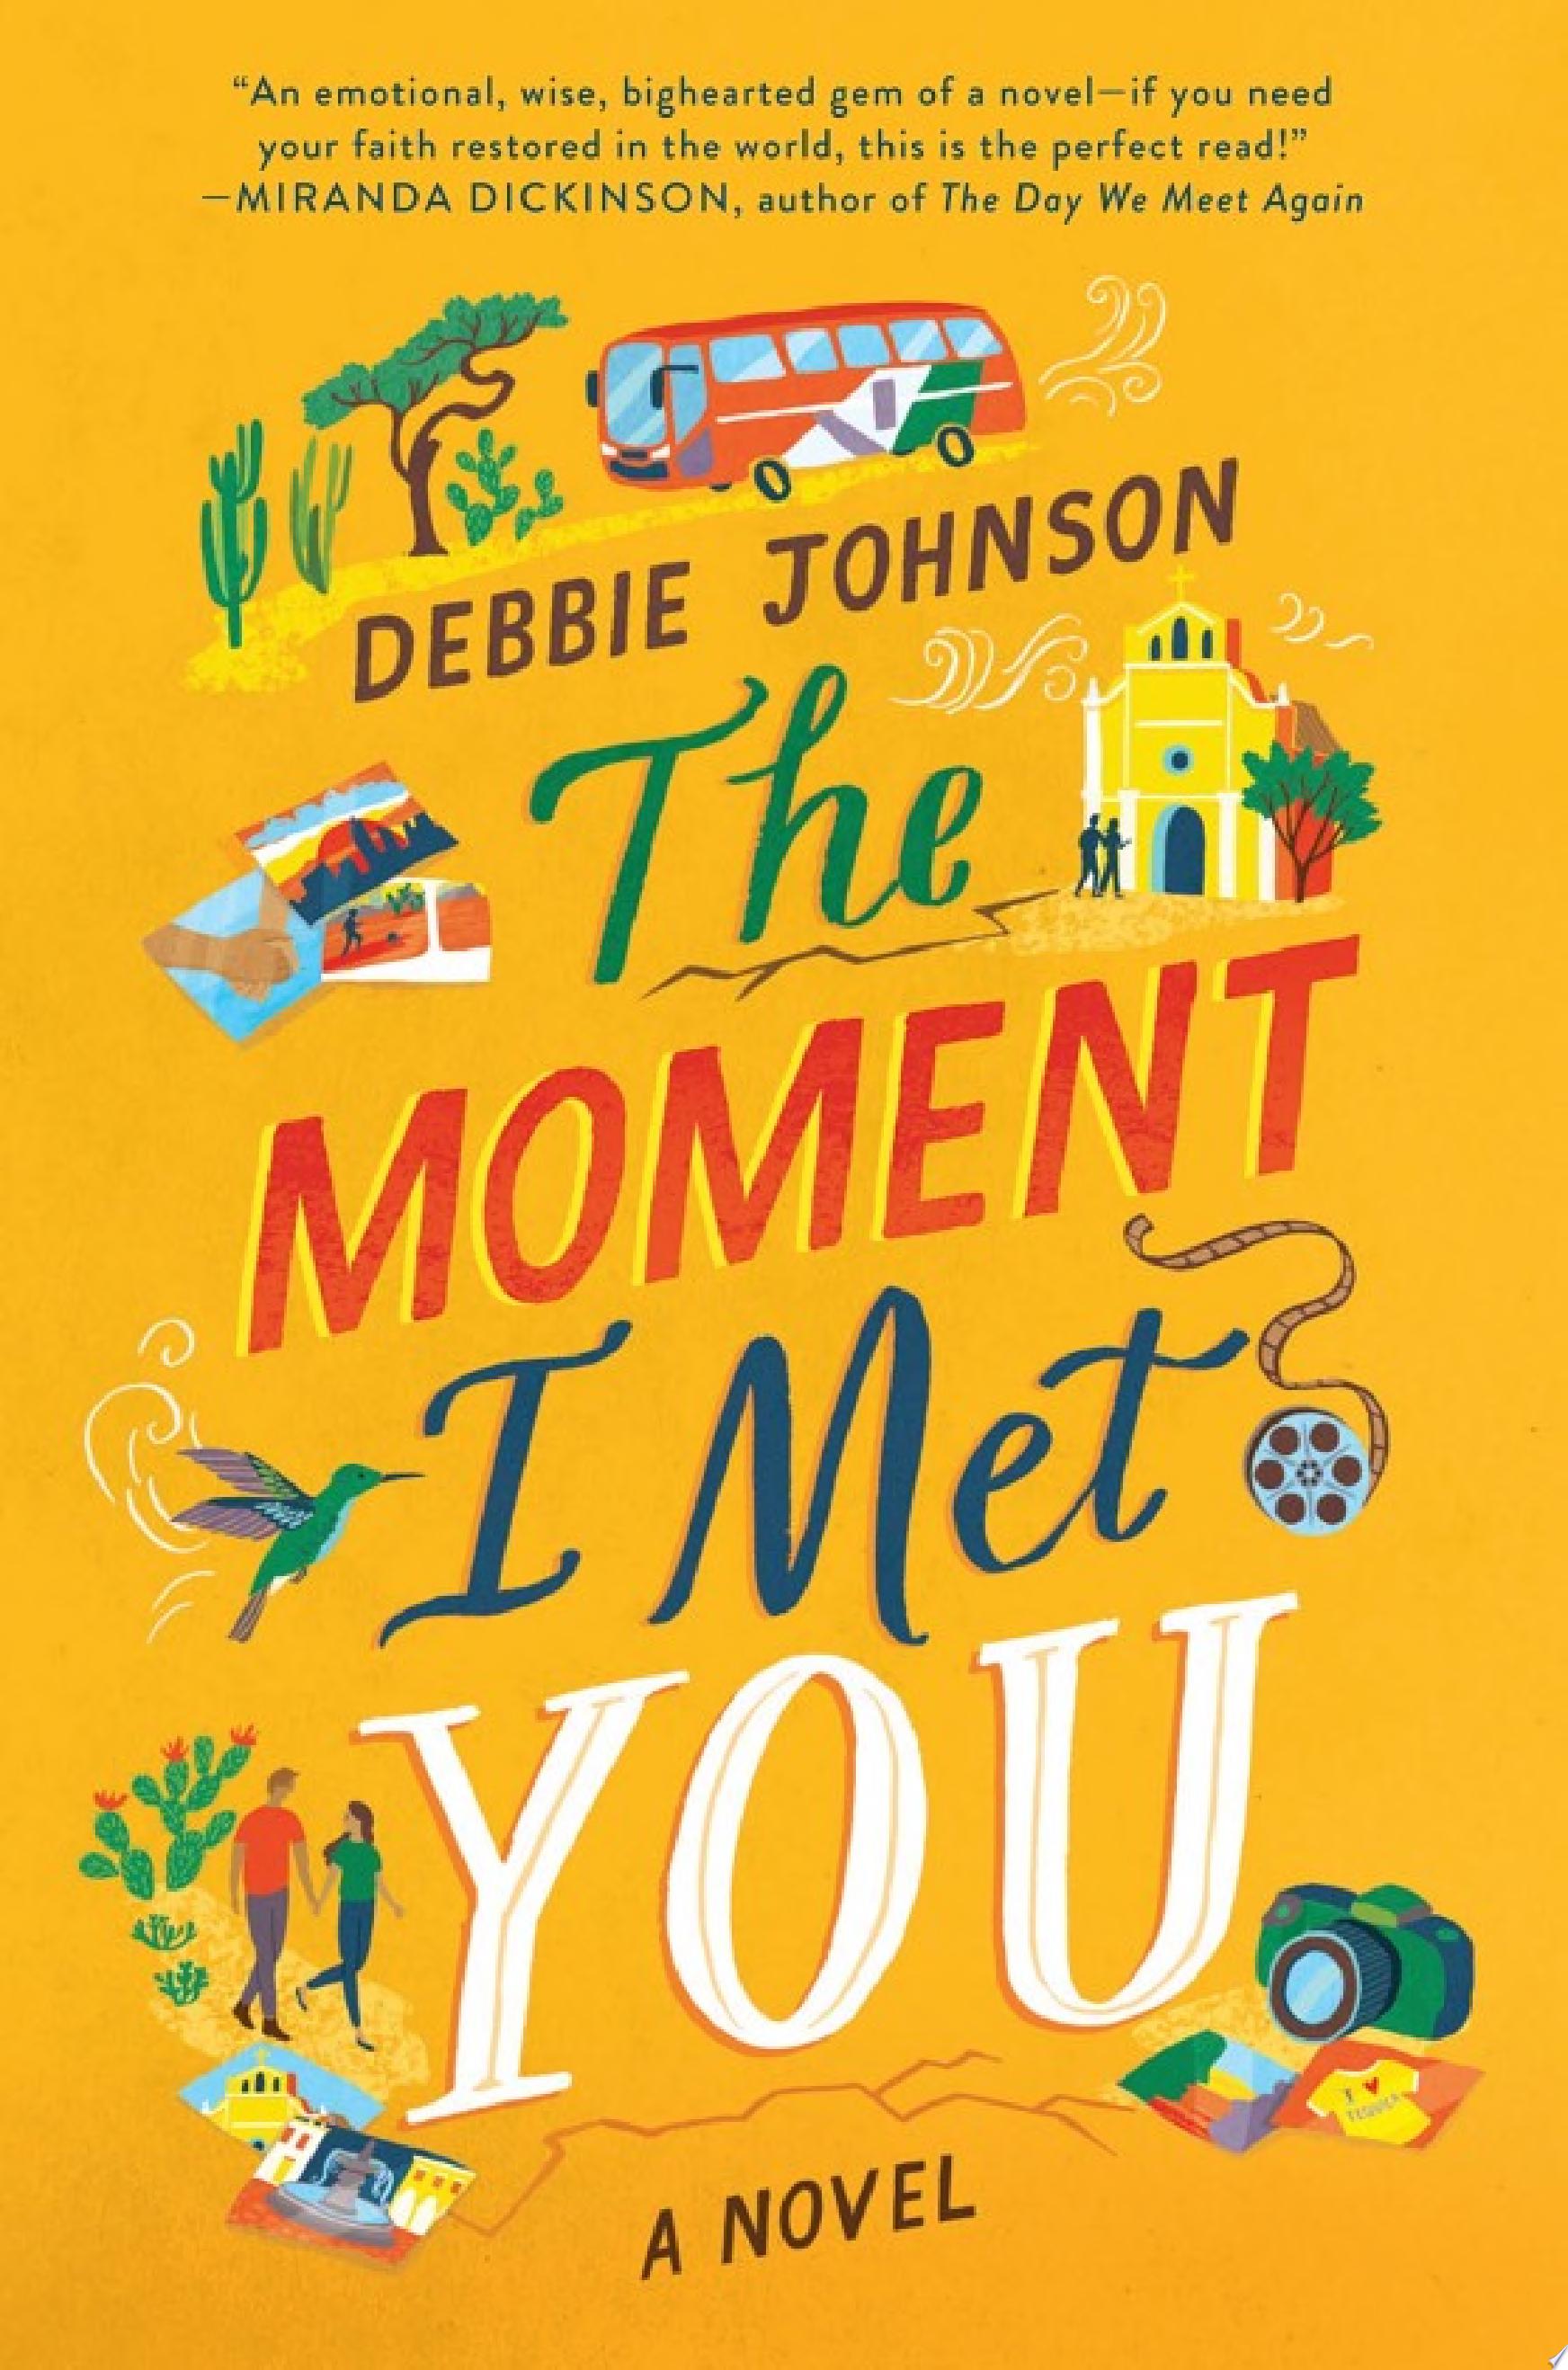 Image for "The Moment I Met You"